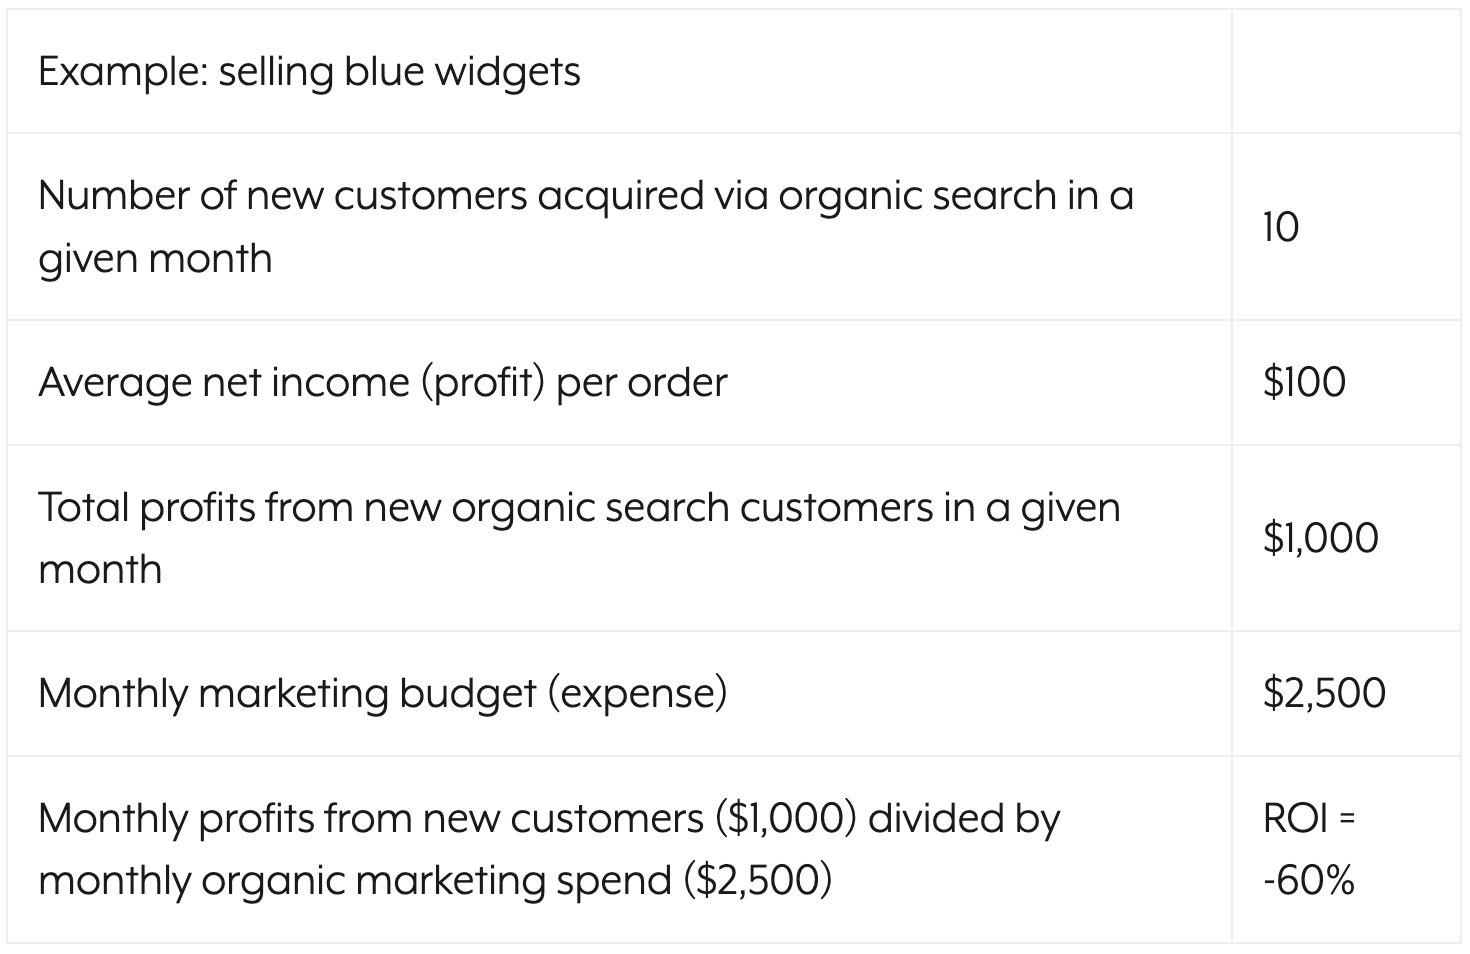 Organic Search ROI Calculation Assuming “One Shots”